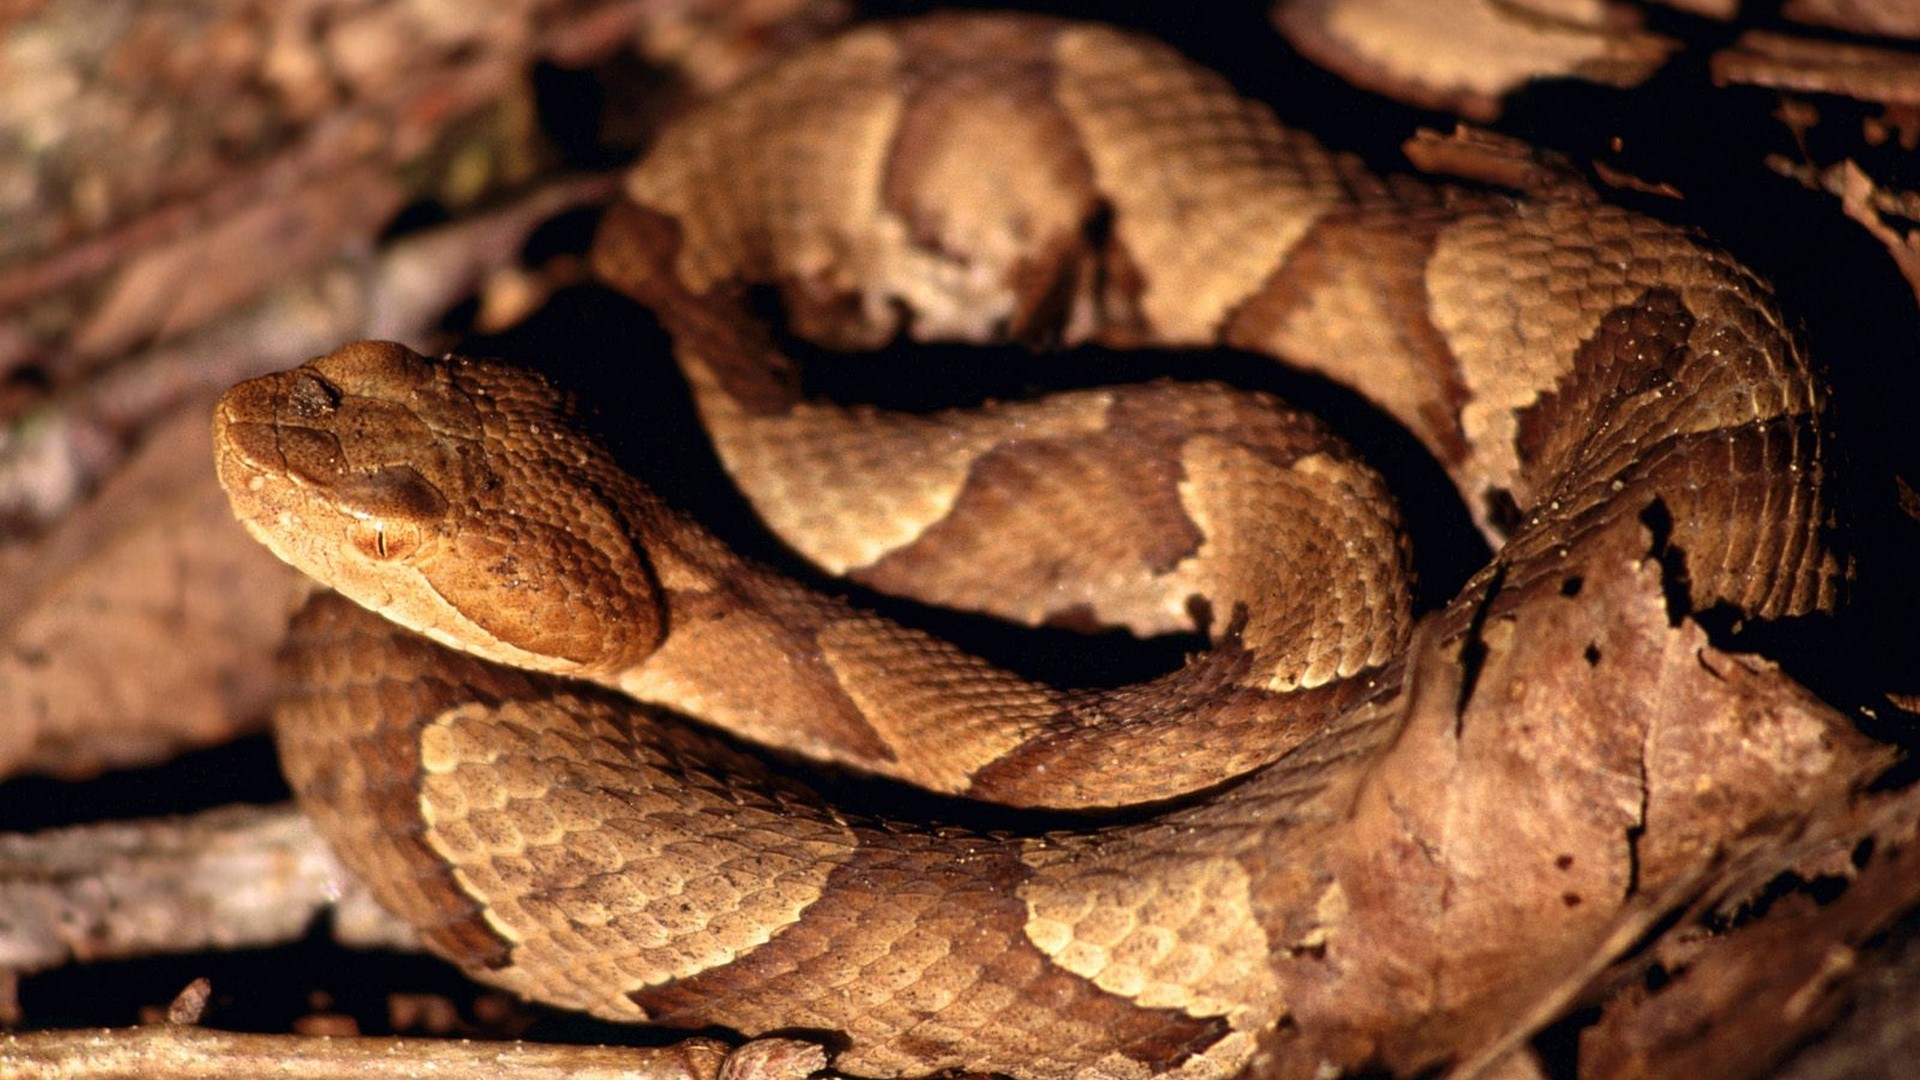 autumn, Wildlife, Snakes, Tennessee, Reptiles, Parks, Creek, American, Copperhead Wallpaper